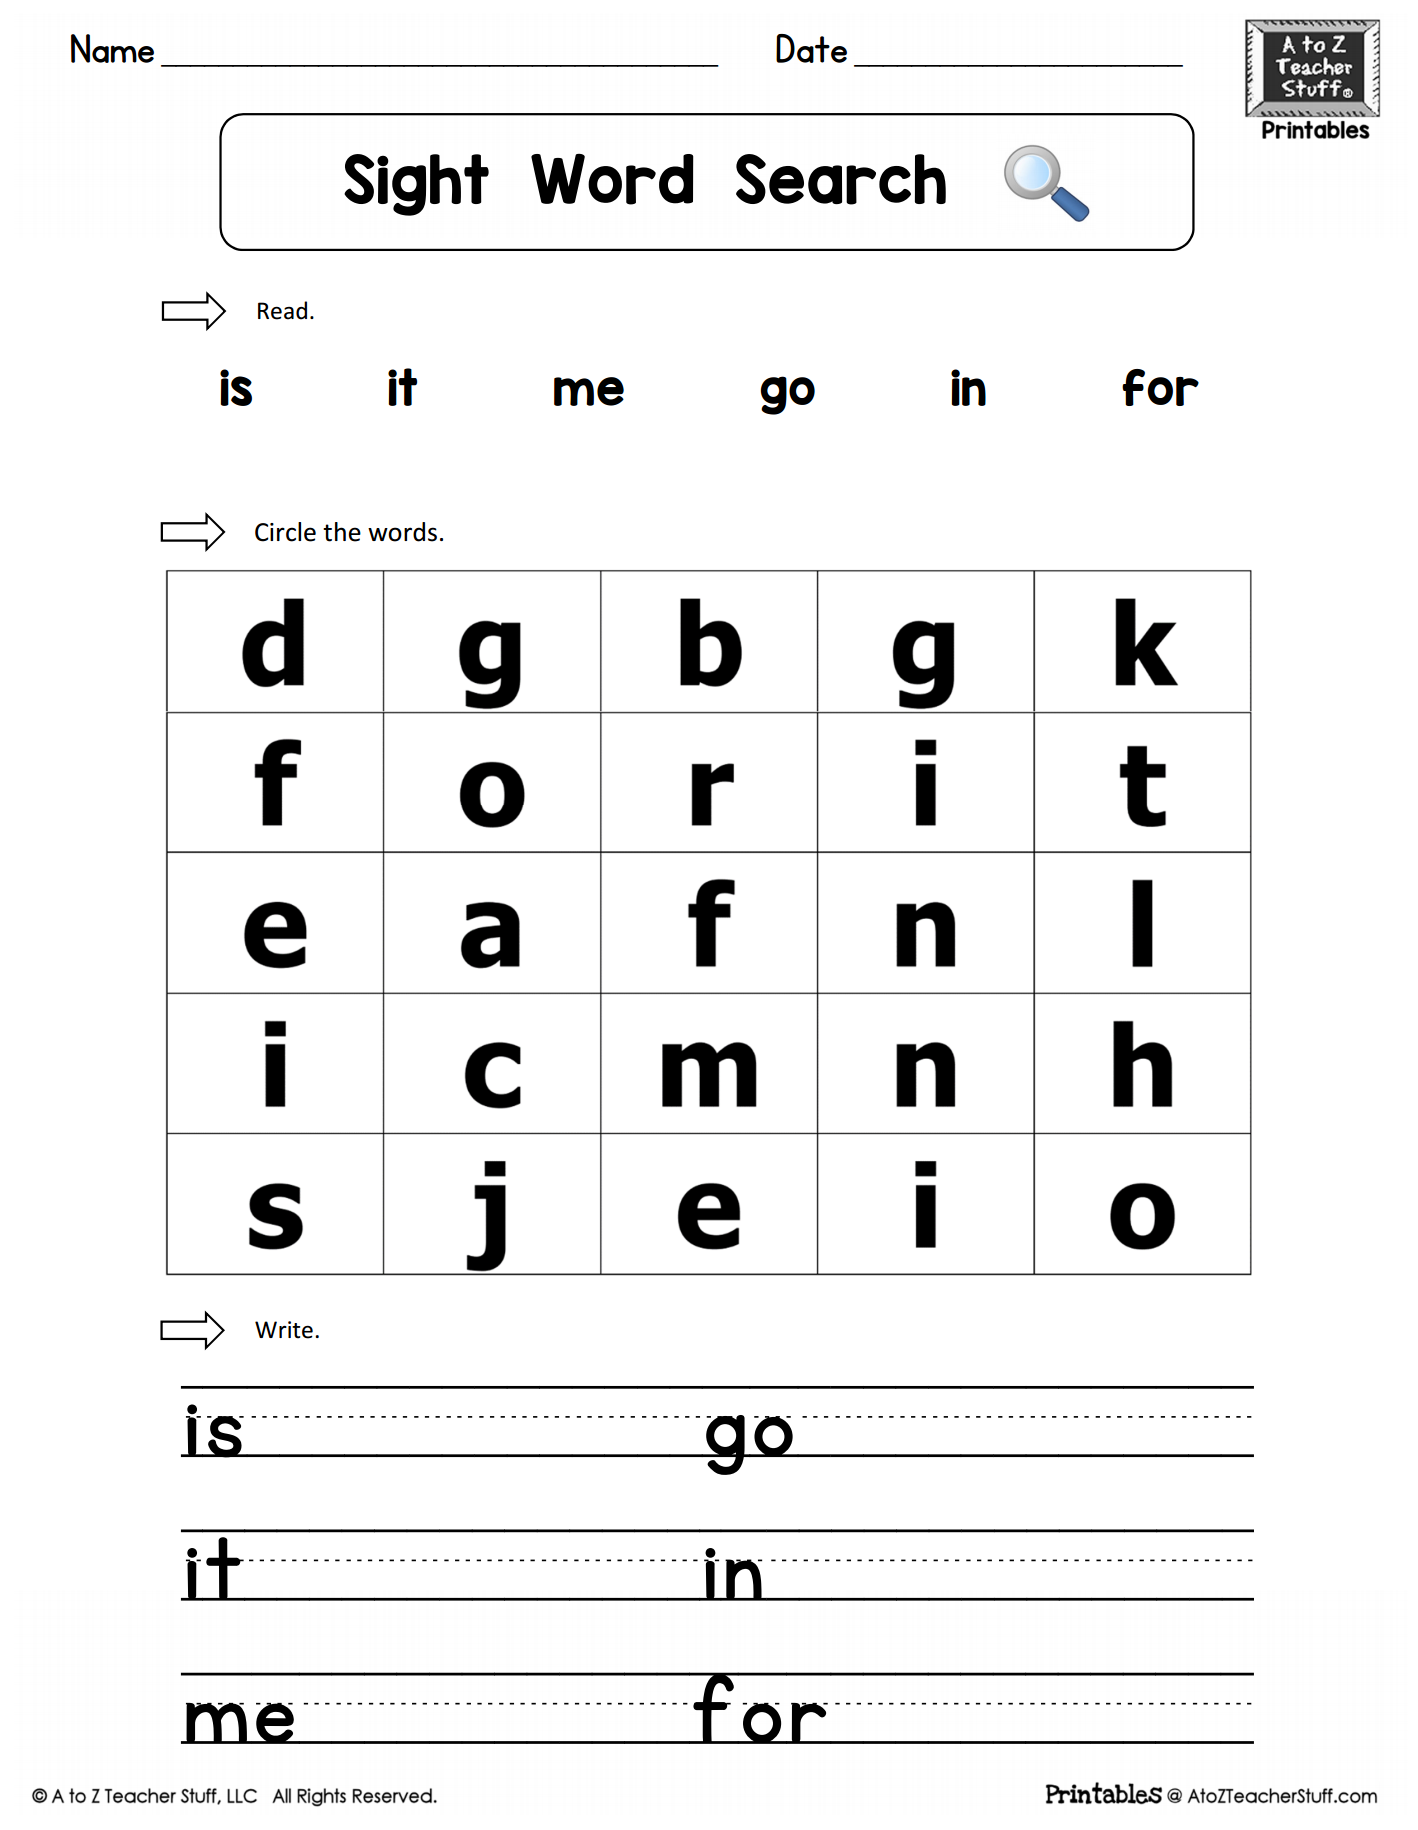 Sight Words Practice Word Search Is It Me Go In For A To Z Teacher Stuff Printable Pages And Worksheets